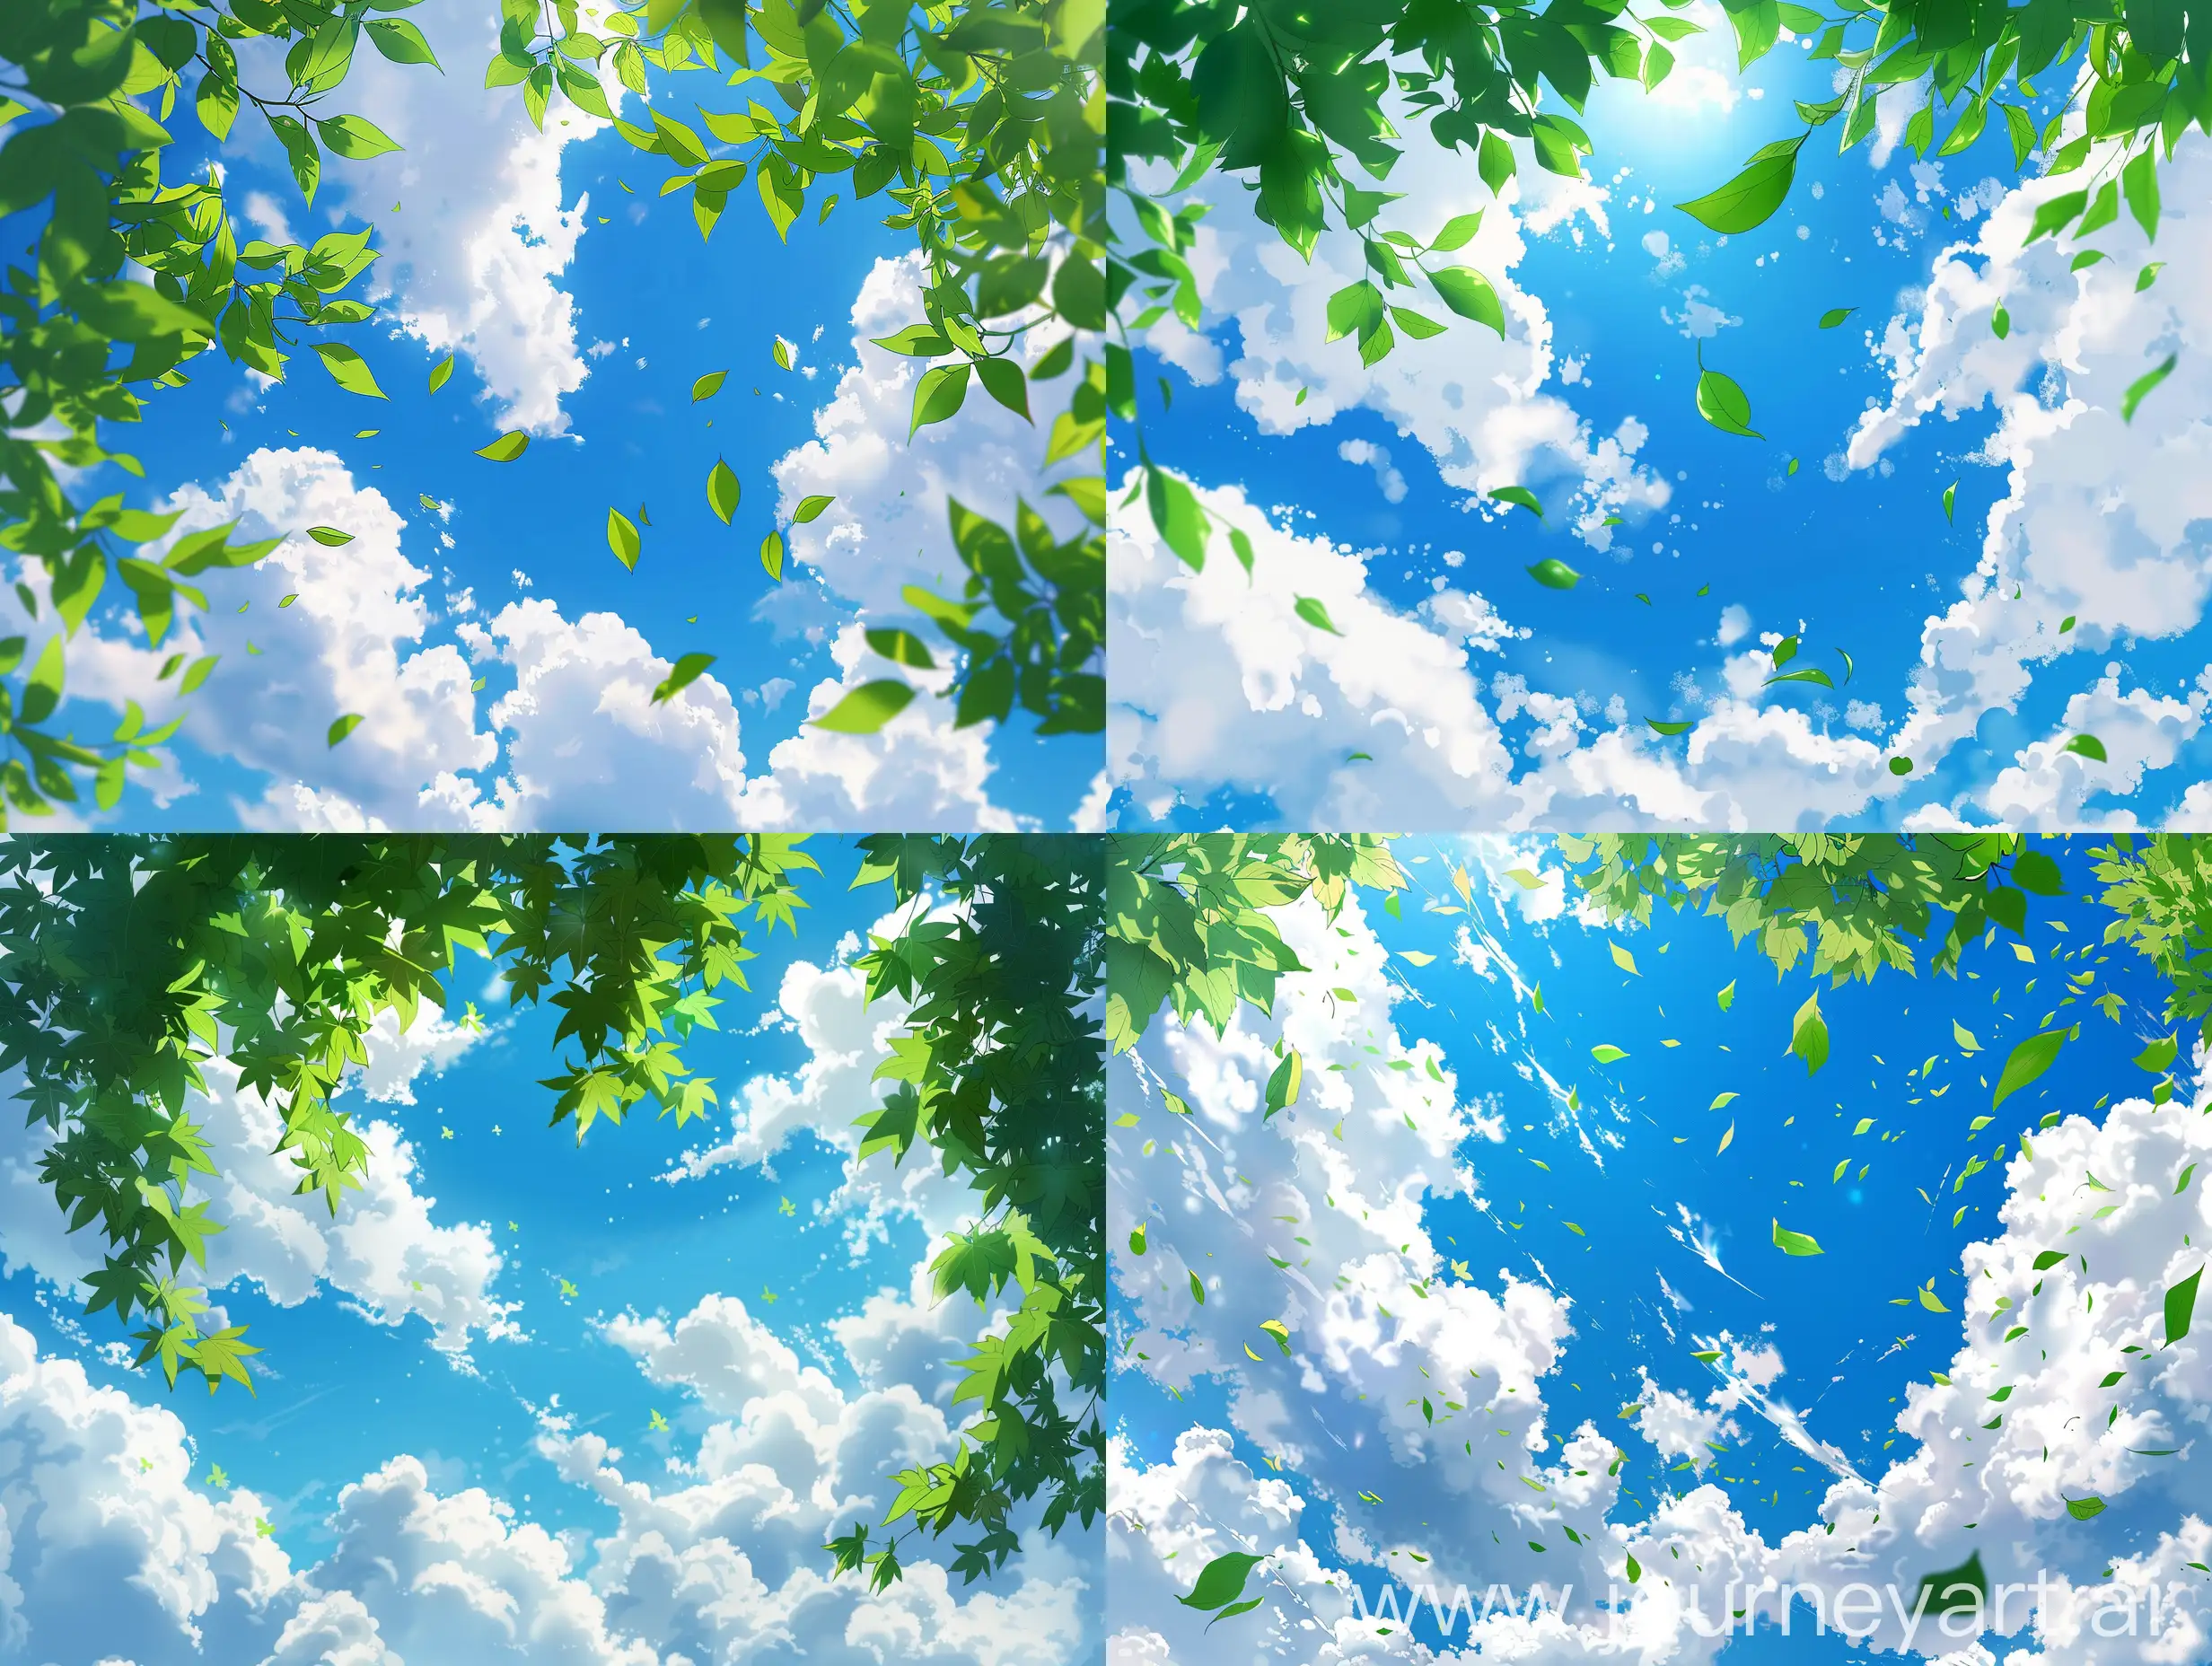 Bright green leaves move between the white clouds in the blue sky like a breeze, pushed by the wind between the clouds.  Anime style, 8k quality.